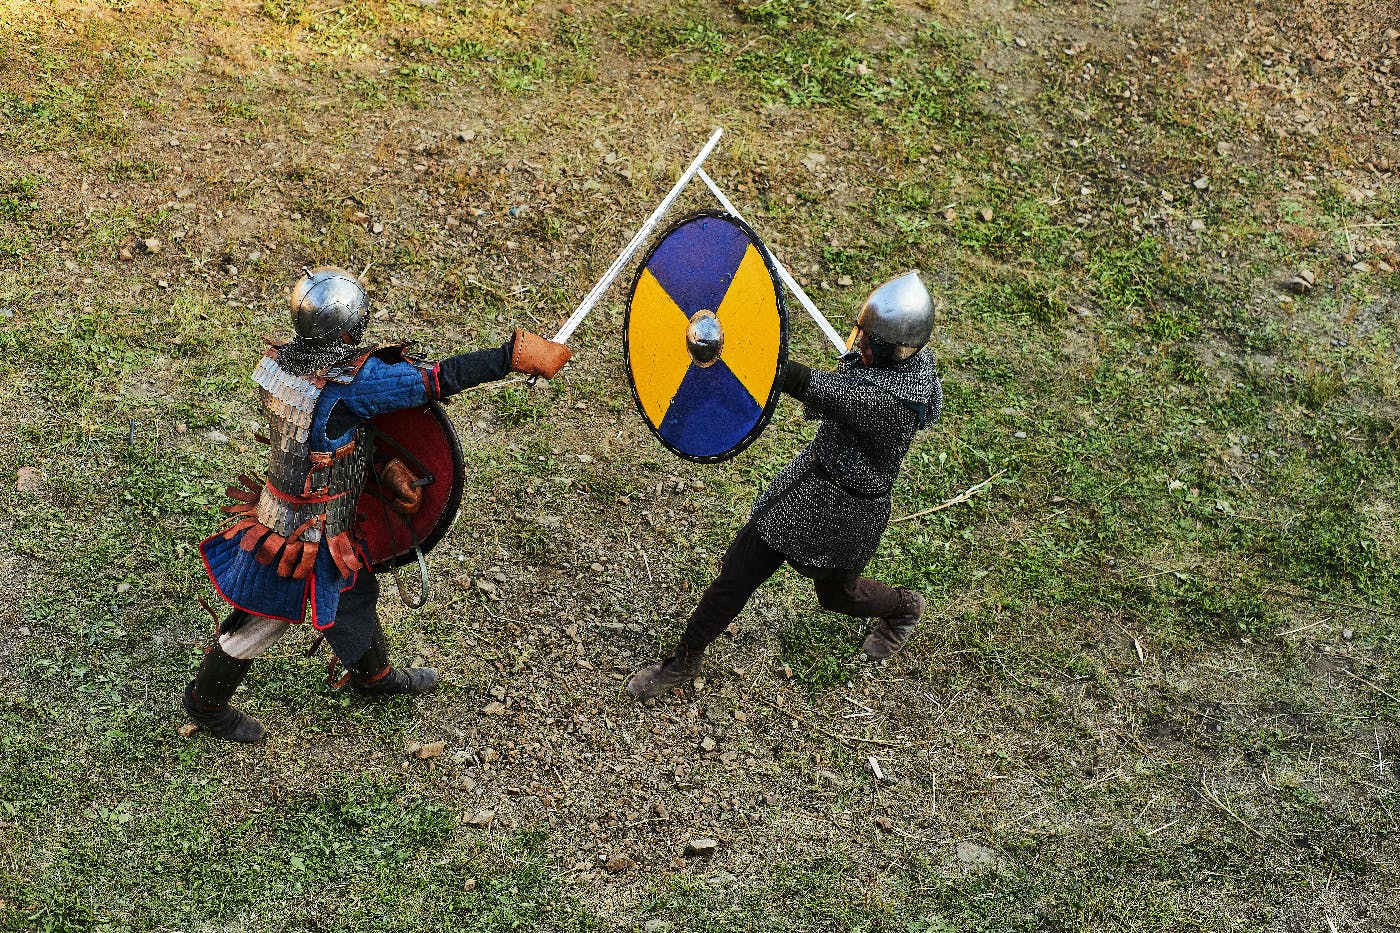 Two knights in a sword fight